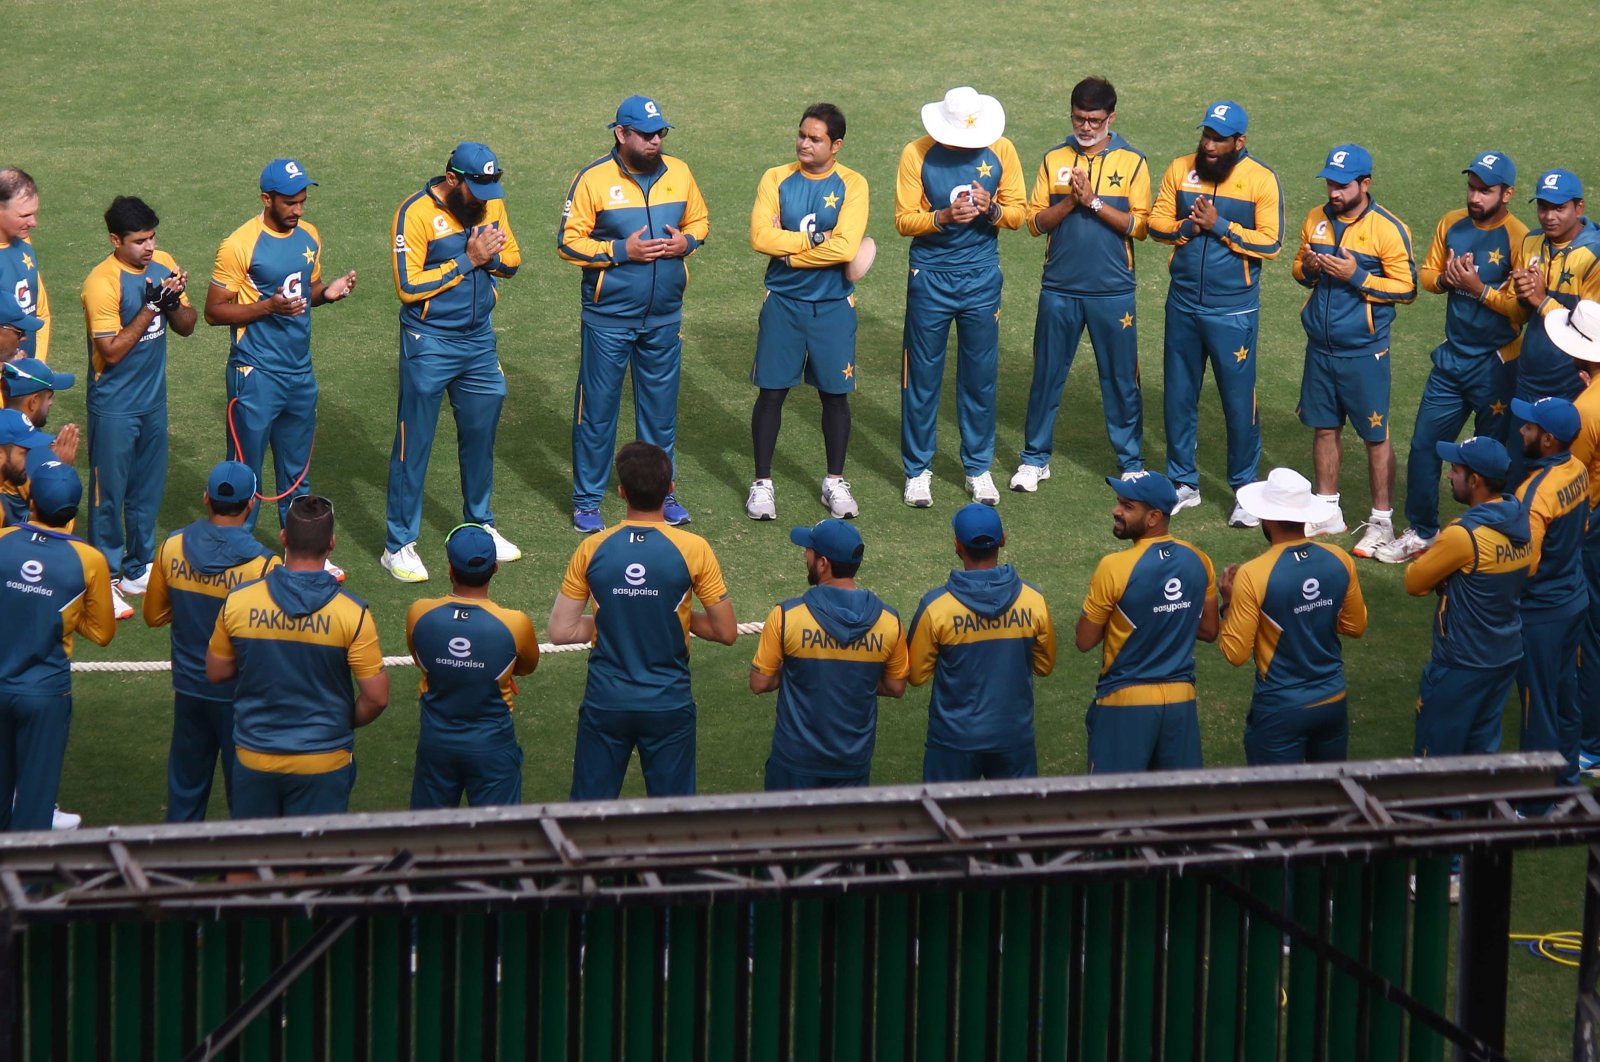 Pakistani cricketers attend a prayer ahead of practice for the Test series against visiting South Africa, Karachi, Pakistan, Jan. 23, 2021. (EPA Photo)